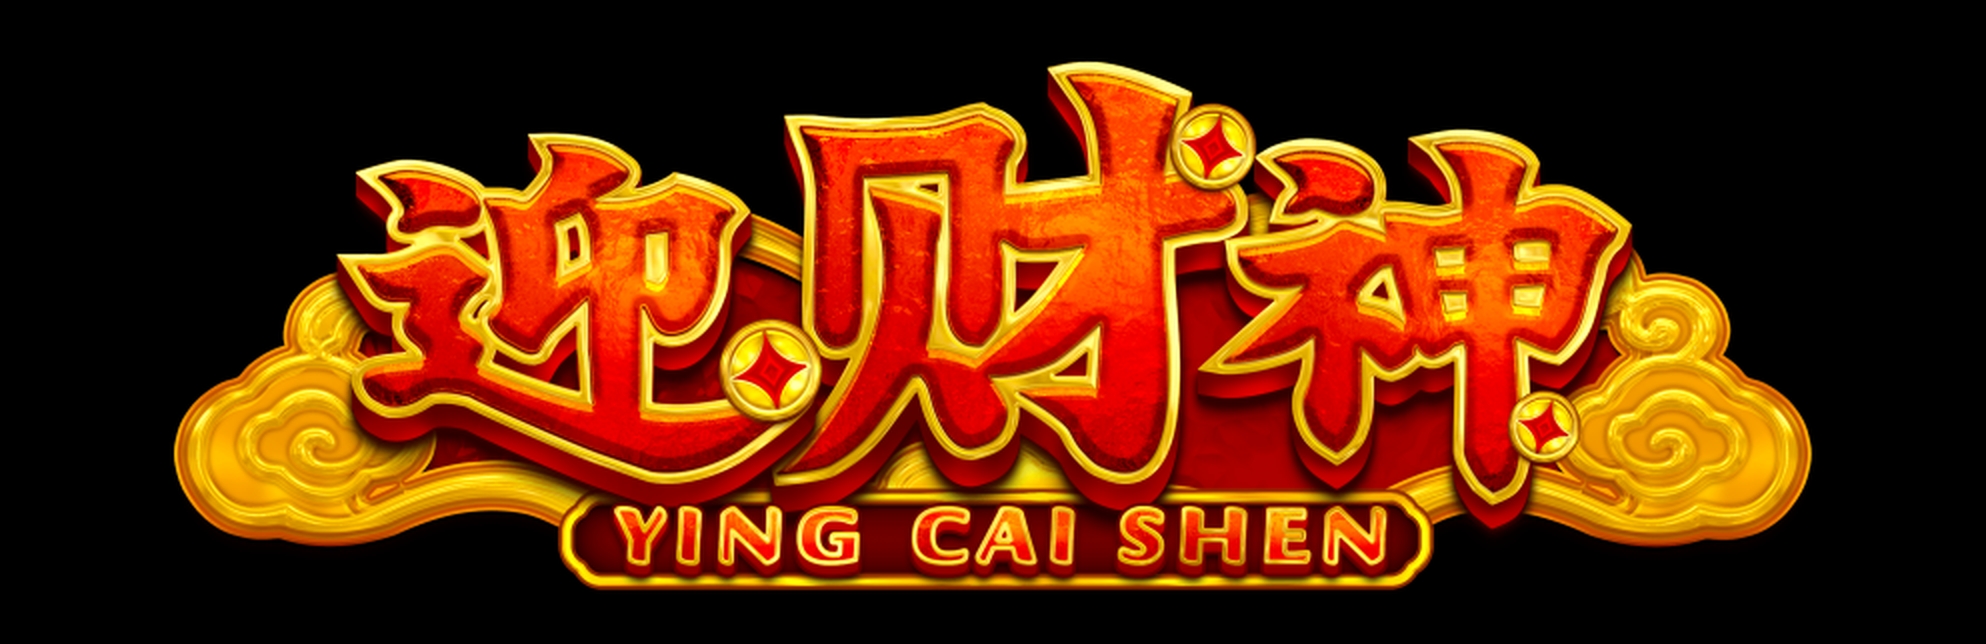 The Ying Cai Shen Online Slot Demo Game by Top Trend Gaming